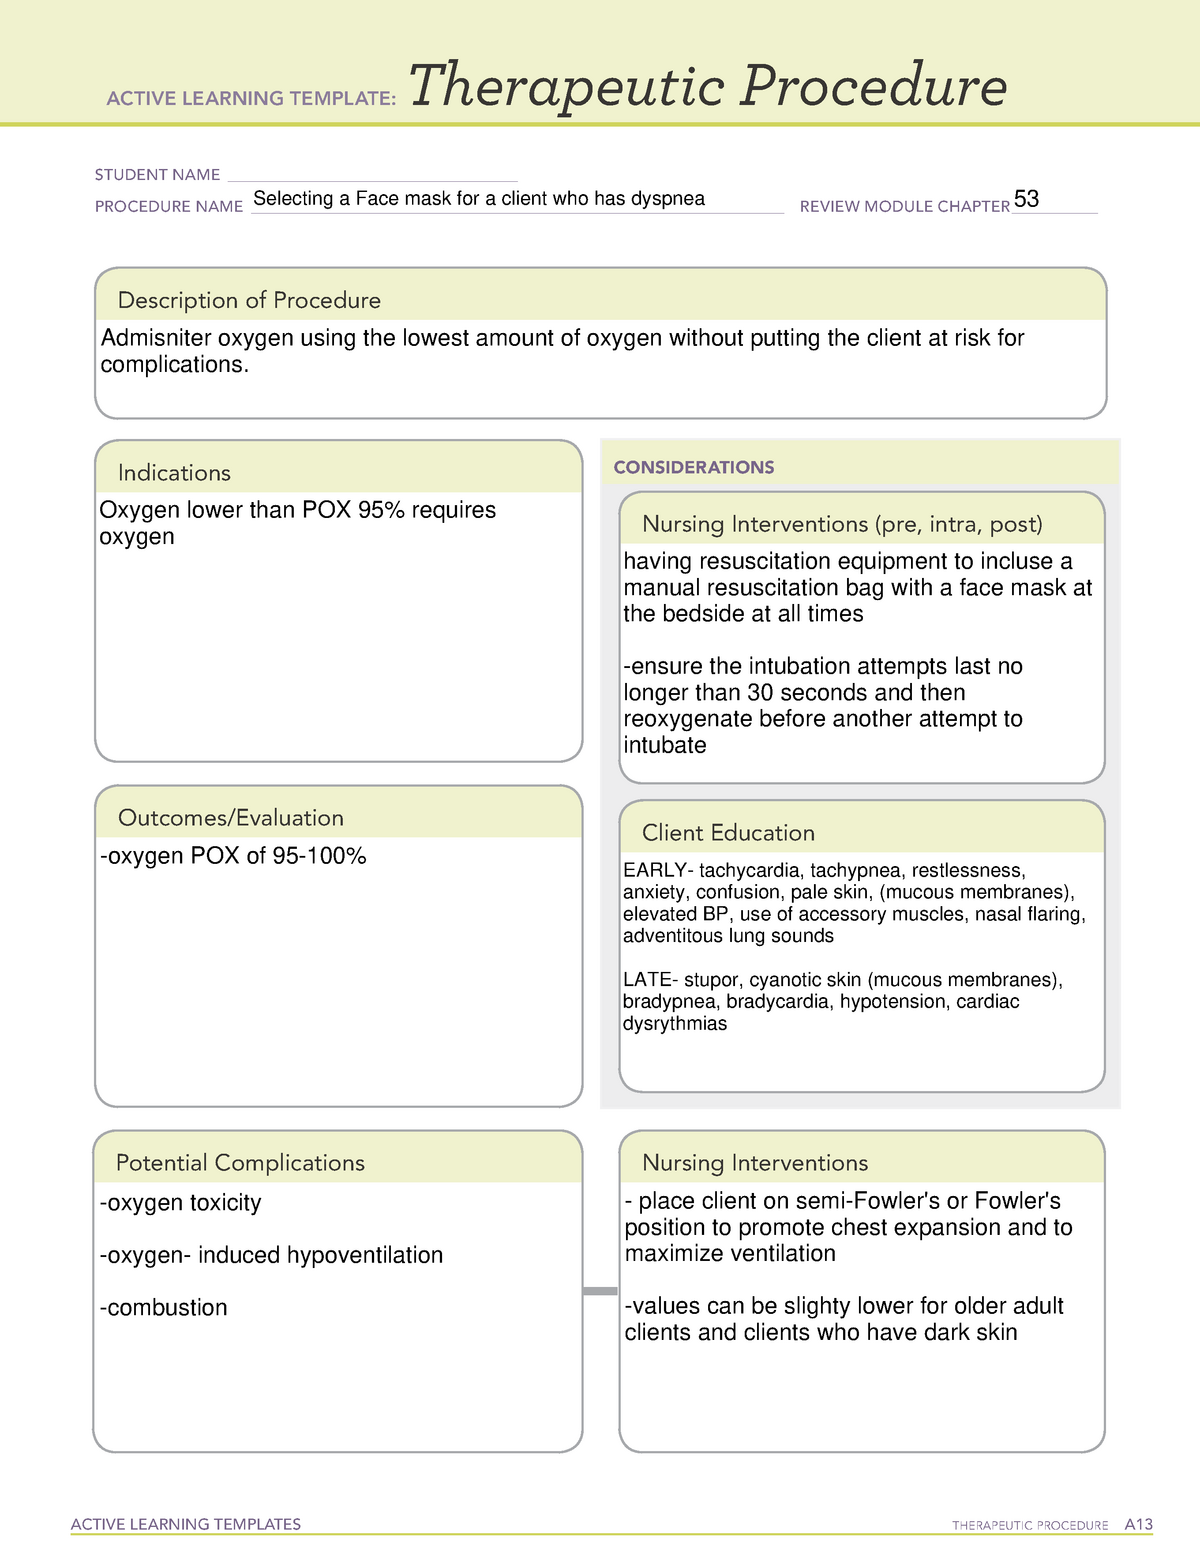 ch-53-client-with-dyspnea-ati-practice-template-review-material-and